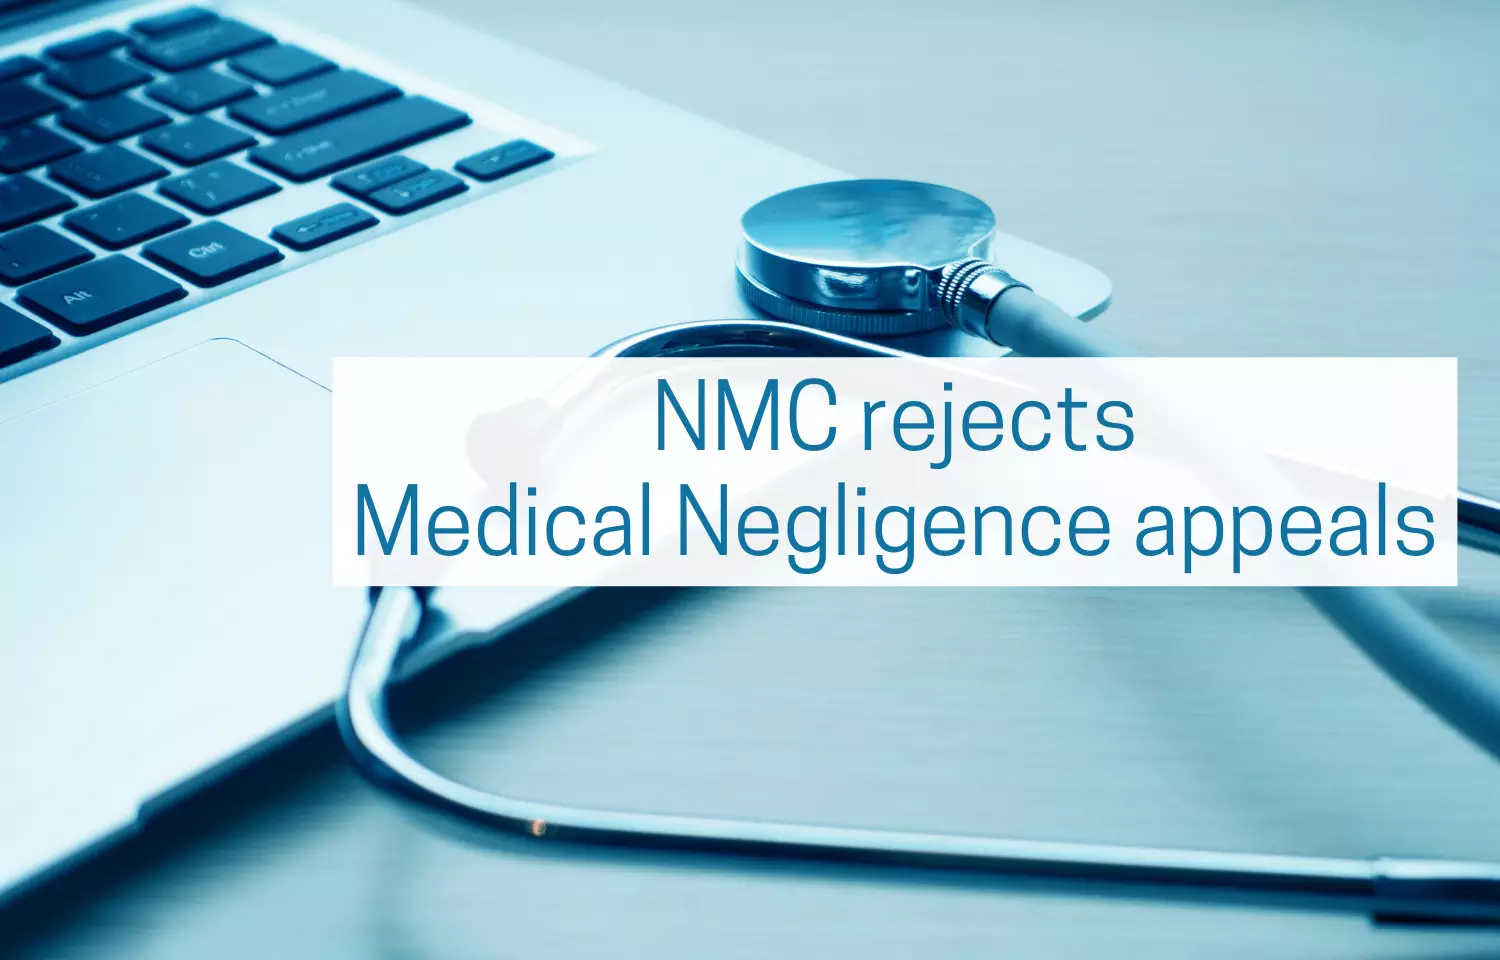 NMC rejected 25 Medical Negligence appeals moved by patients kin, reveals RTI